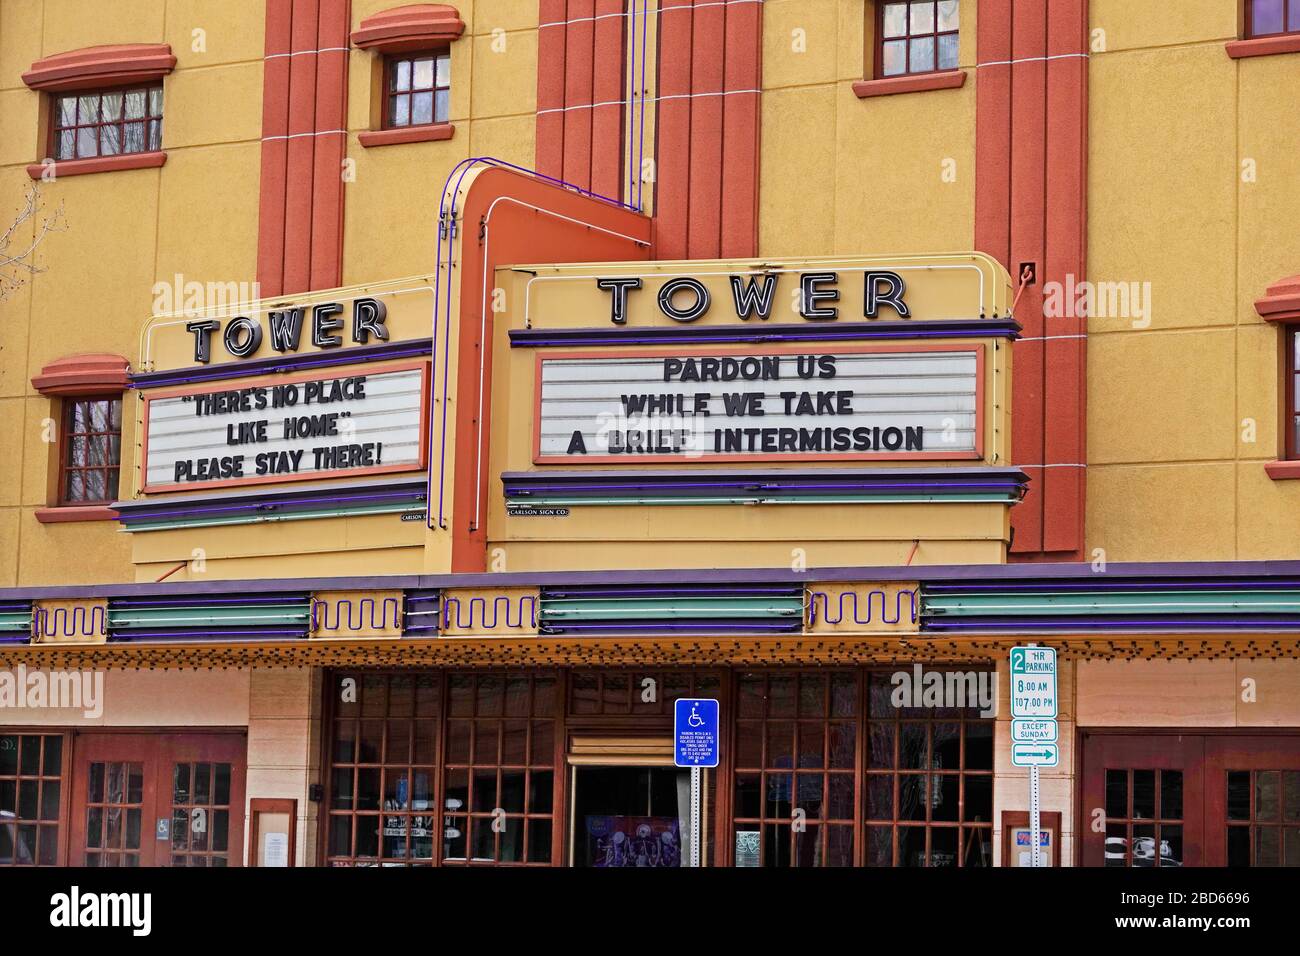 The event venue Tower Theater in Bend, Oregon, displaying 'Stay Home' signs during the Coronavirus pandemic of 2020. Stock Photo